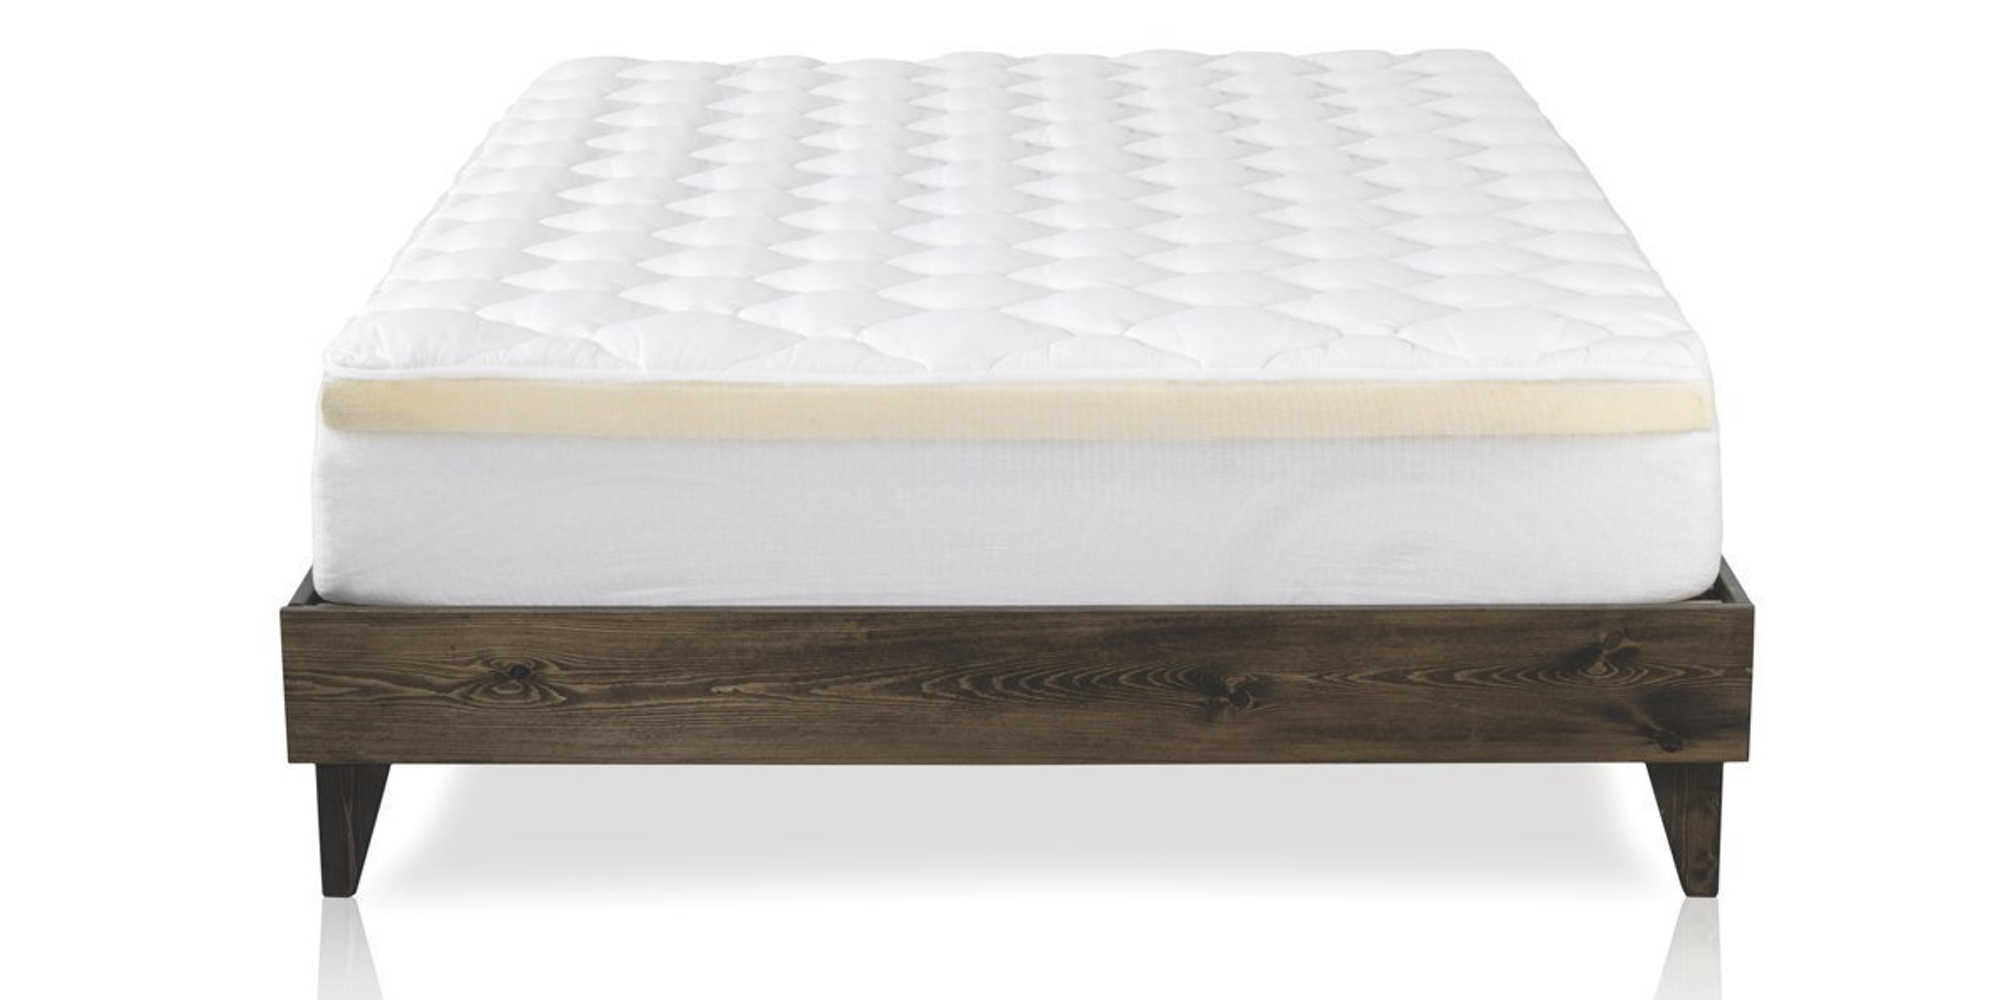 thick mattress pad for twin bed